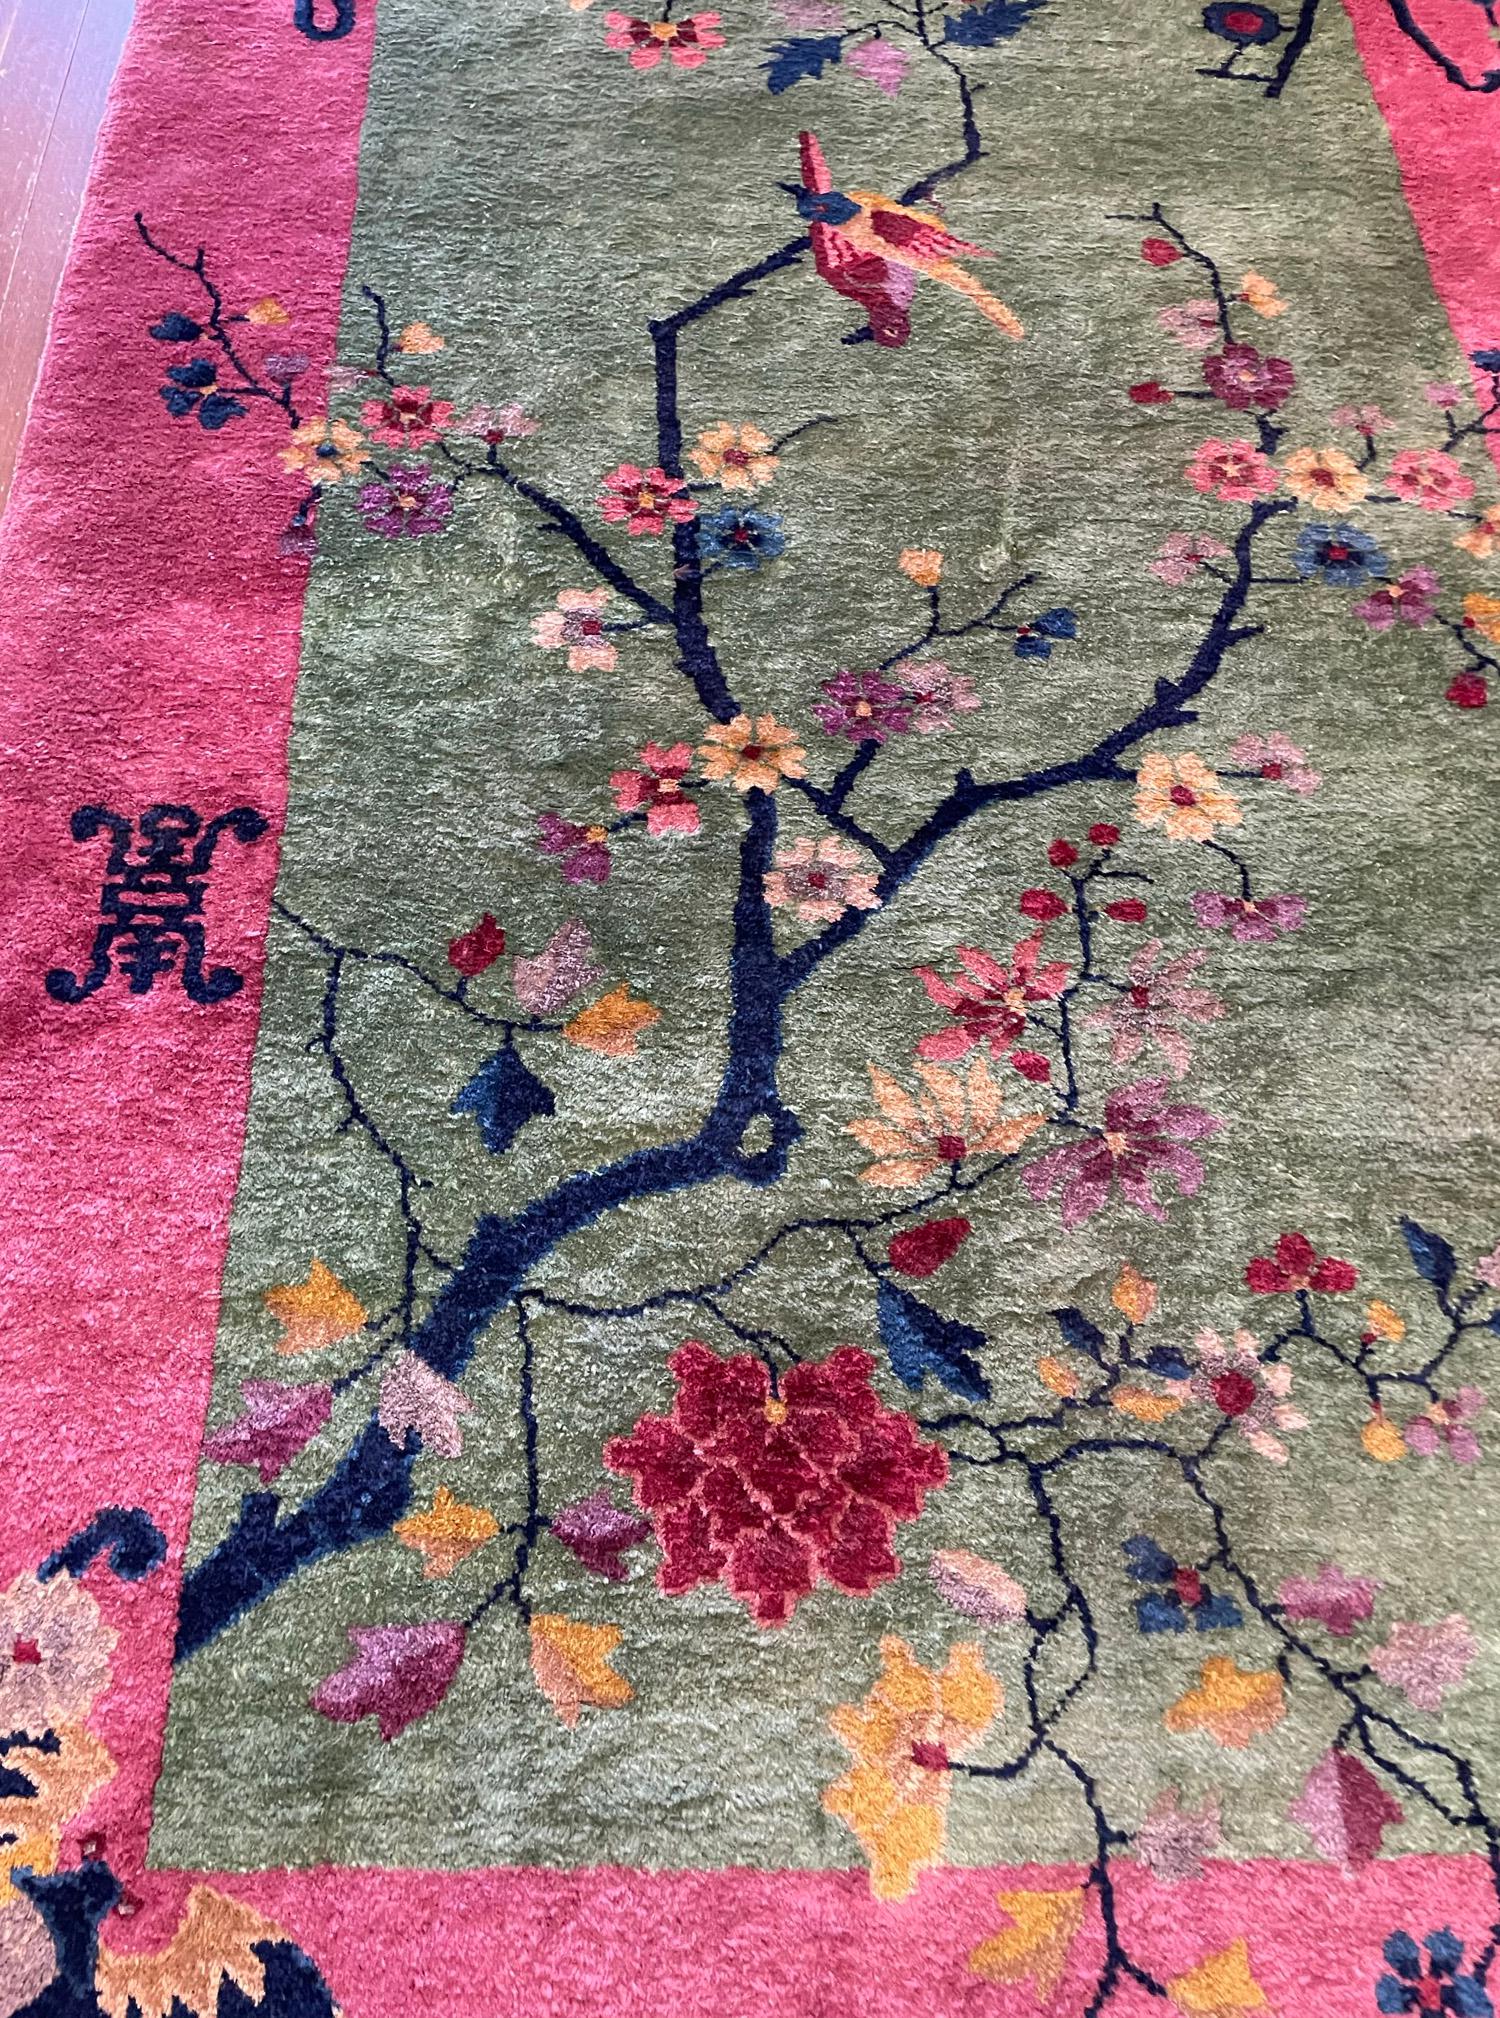 ﻿Introducing the first of our splendid pair, the Tree of Life Chinese rug, where artistry intertwines with symbolism. The enchanting jade green field hosts a majestic Tree of Life, where birds find sanctuary upon its branches, embracing the essence